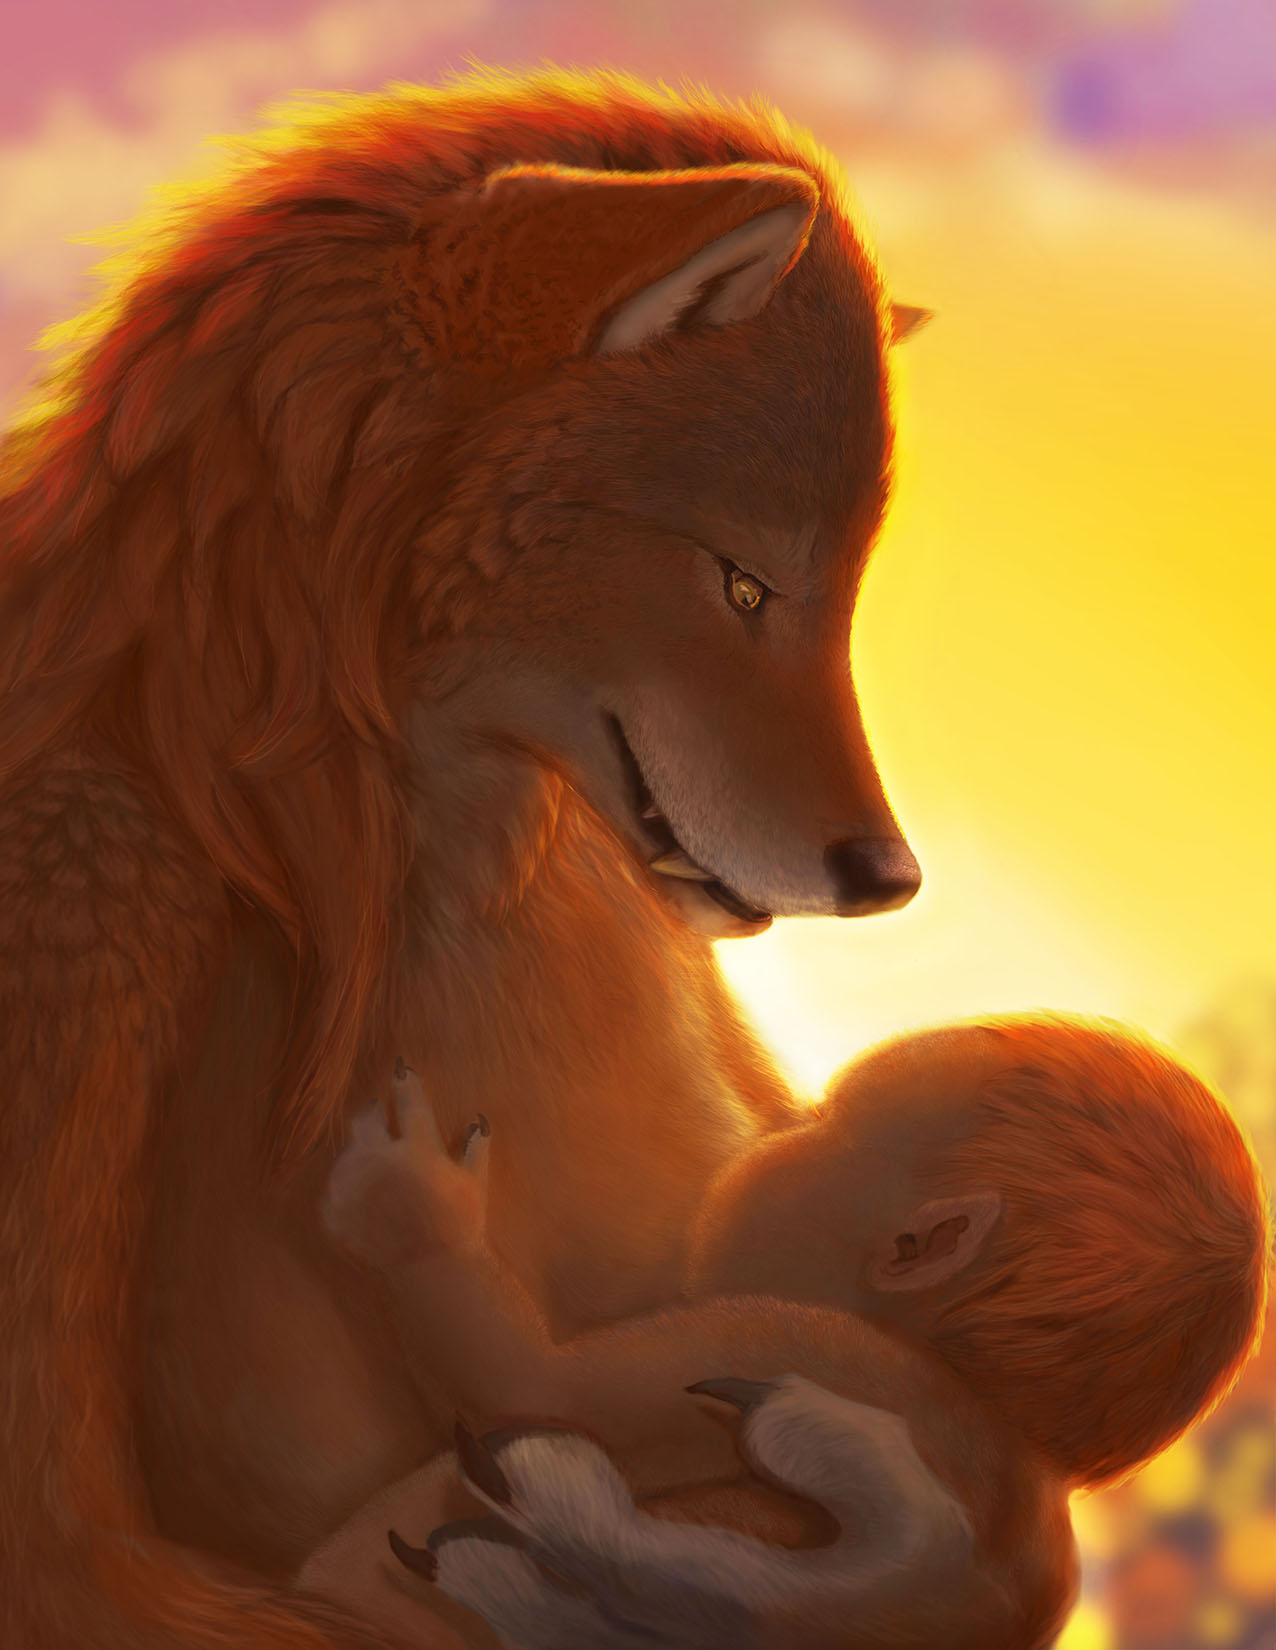 A A werewolf mother nurses a tiny newborn in the light of the dawn.